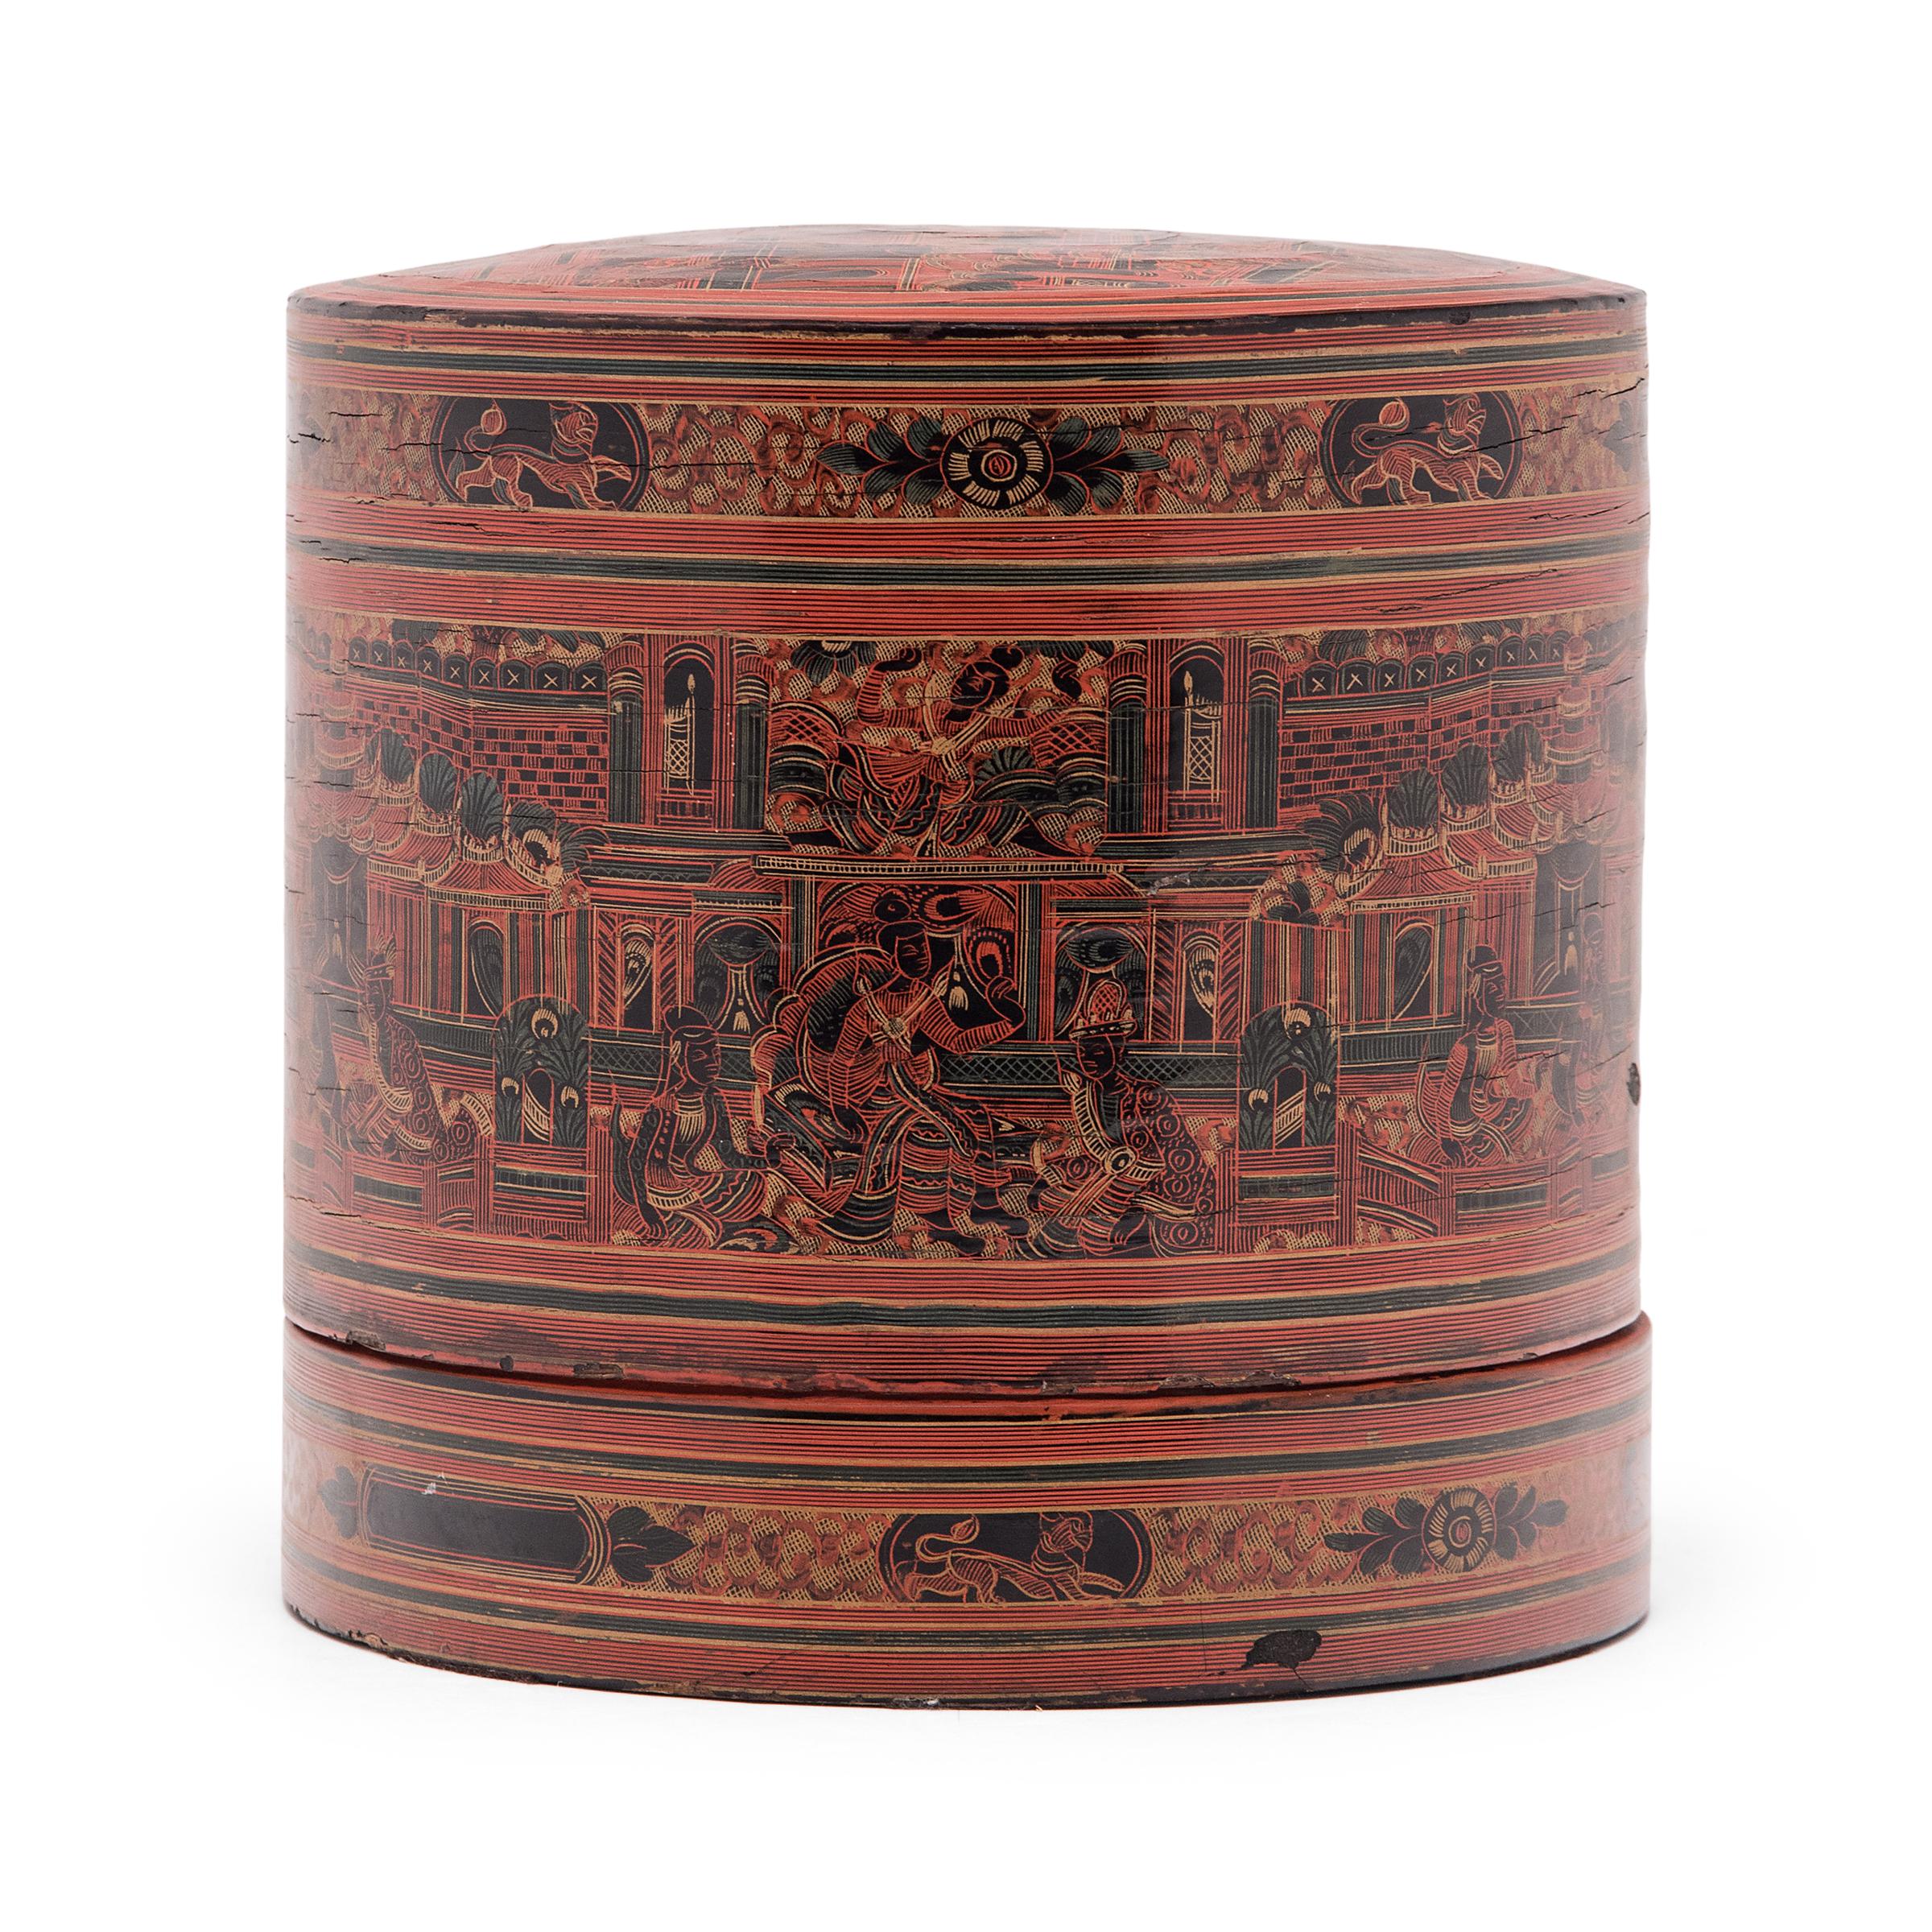 In many southeast Asian cultures, offering guests a betel quid to chew was the fundamental symbol of hospitality. A blend of leaves, nuts, seasonings, and sometimes tobacco, betel was kept in finely worked and highly decorated boxes.

Crafted in